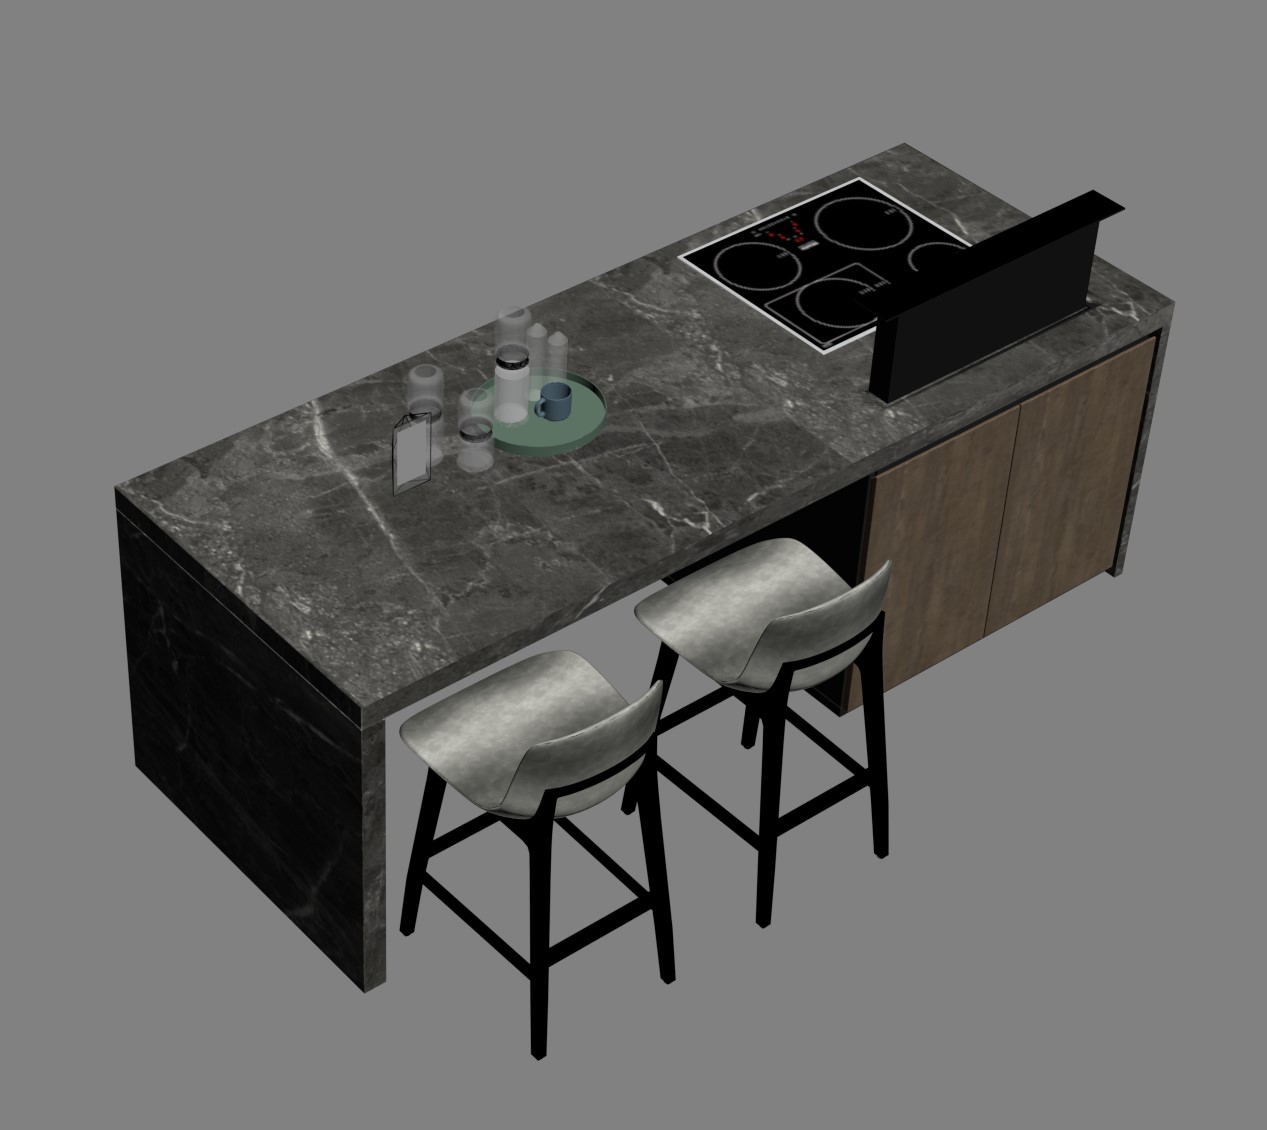 10402. Download Free Table Model By Thuy Vu Ngoc